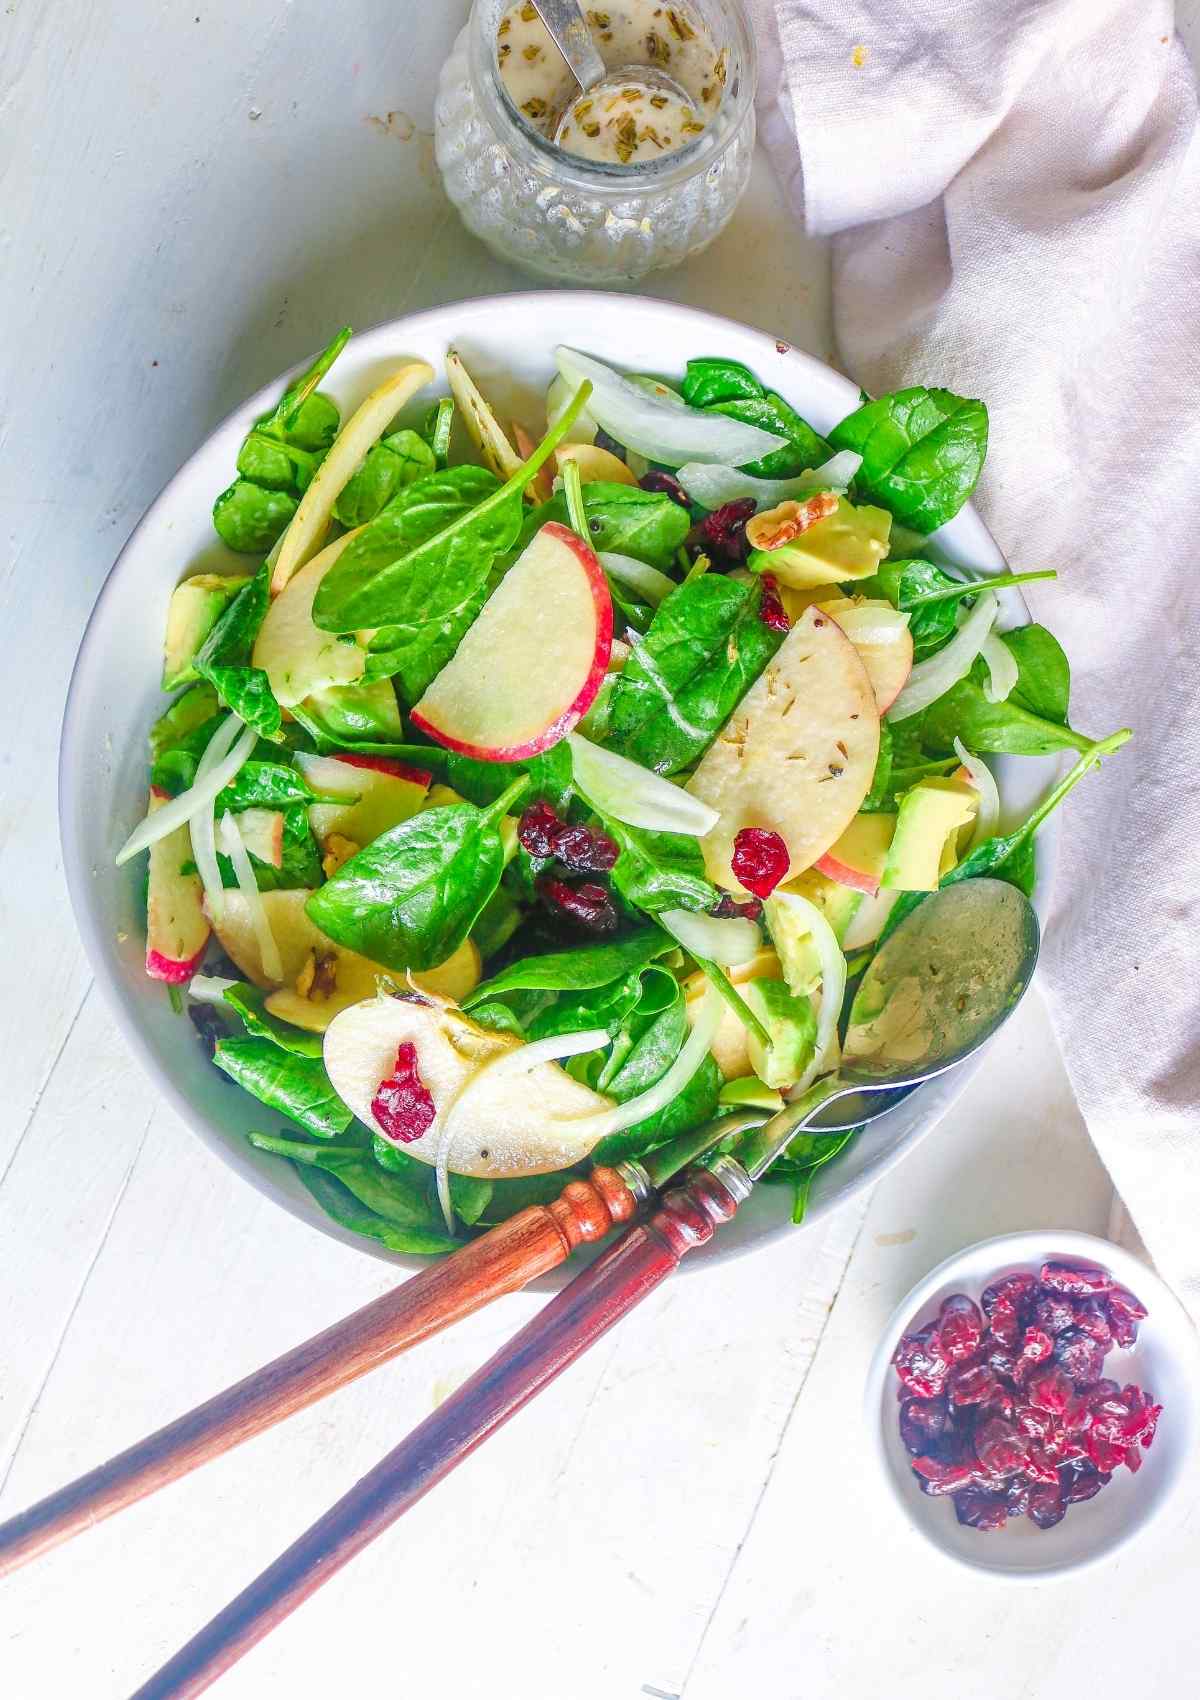 Spinach salad in a bowl with dressing and cranberries on side